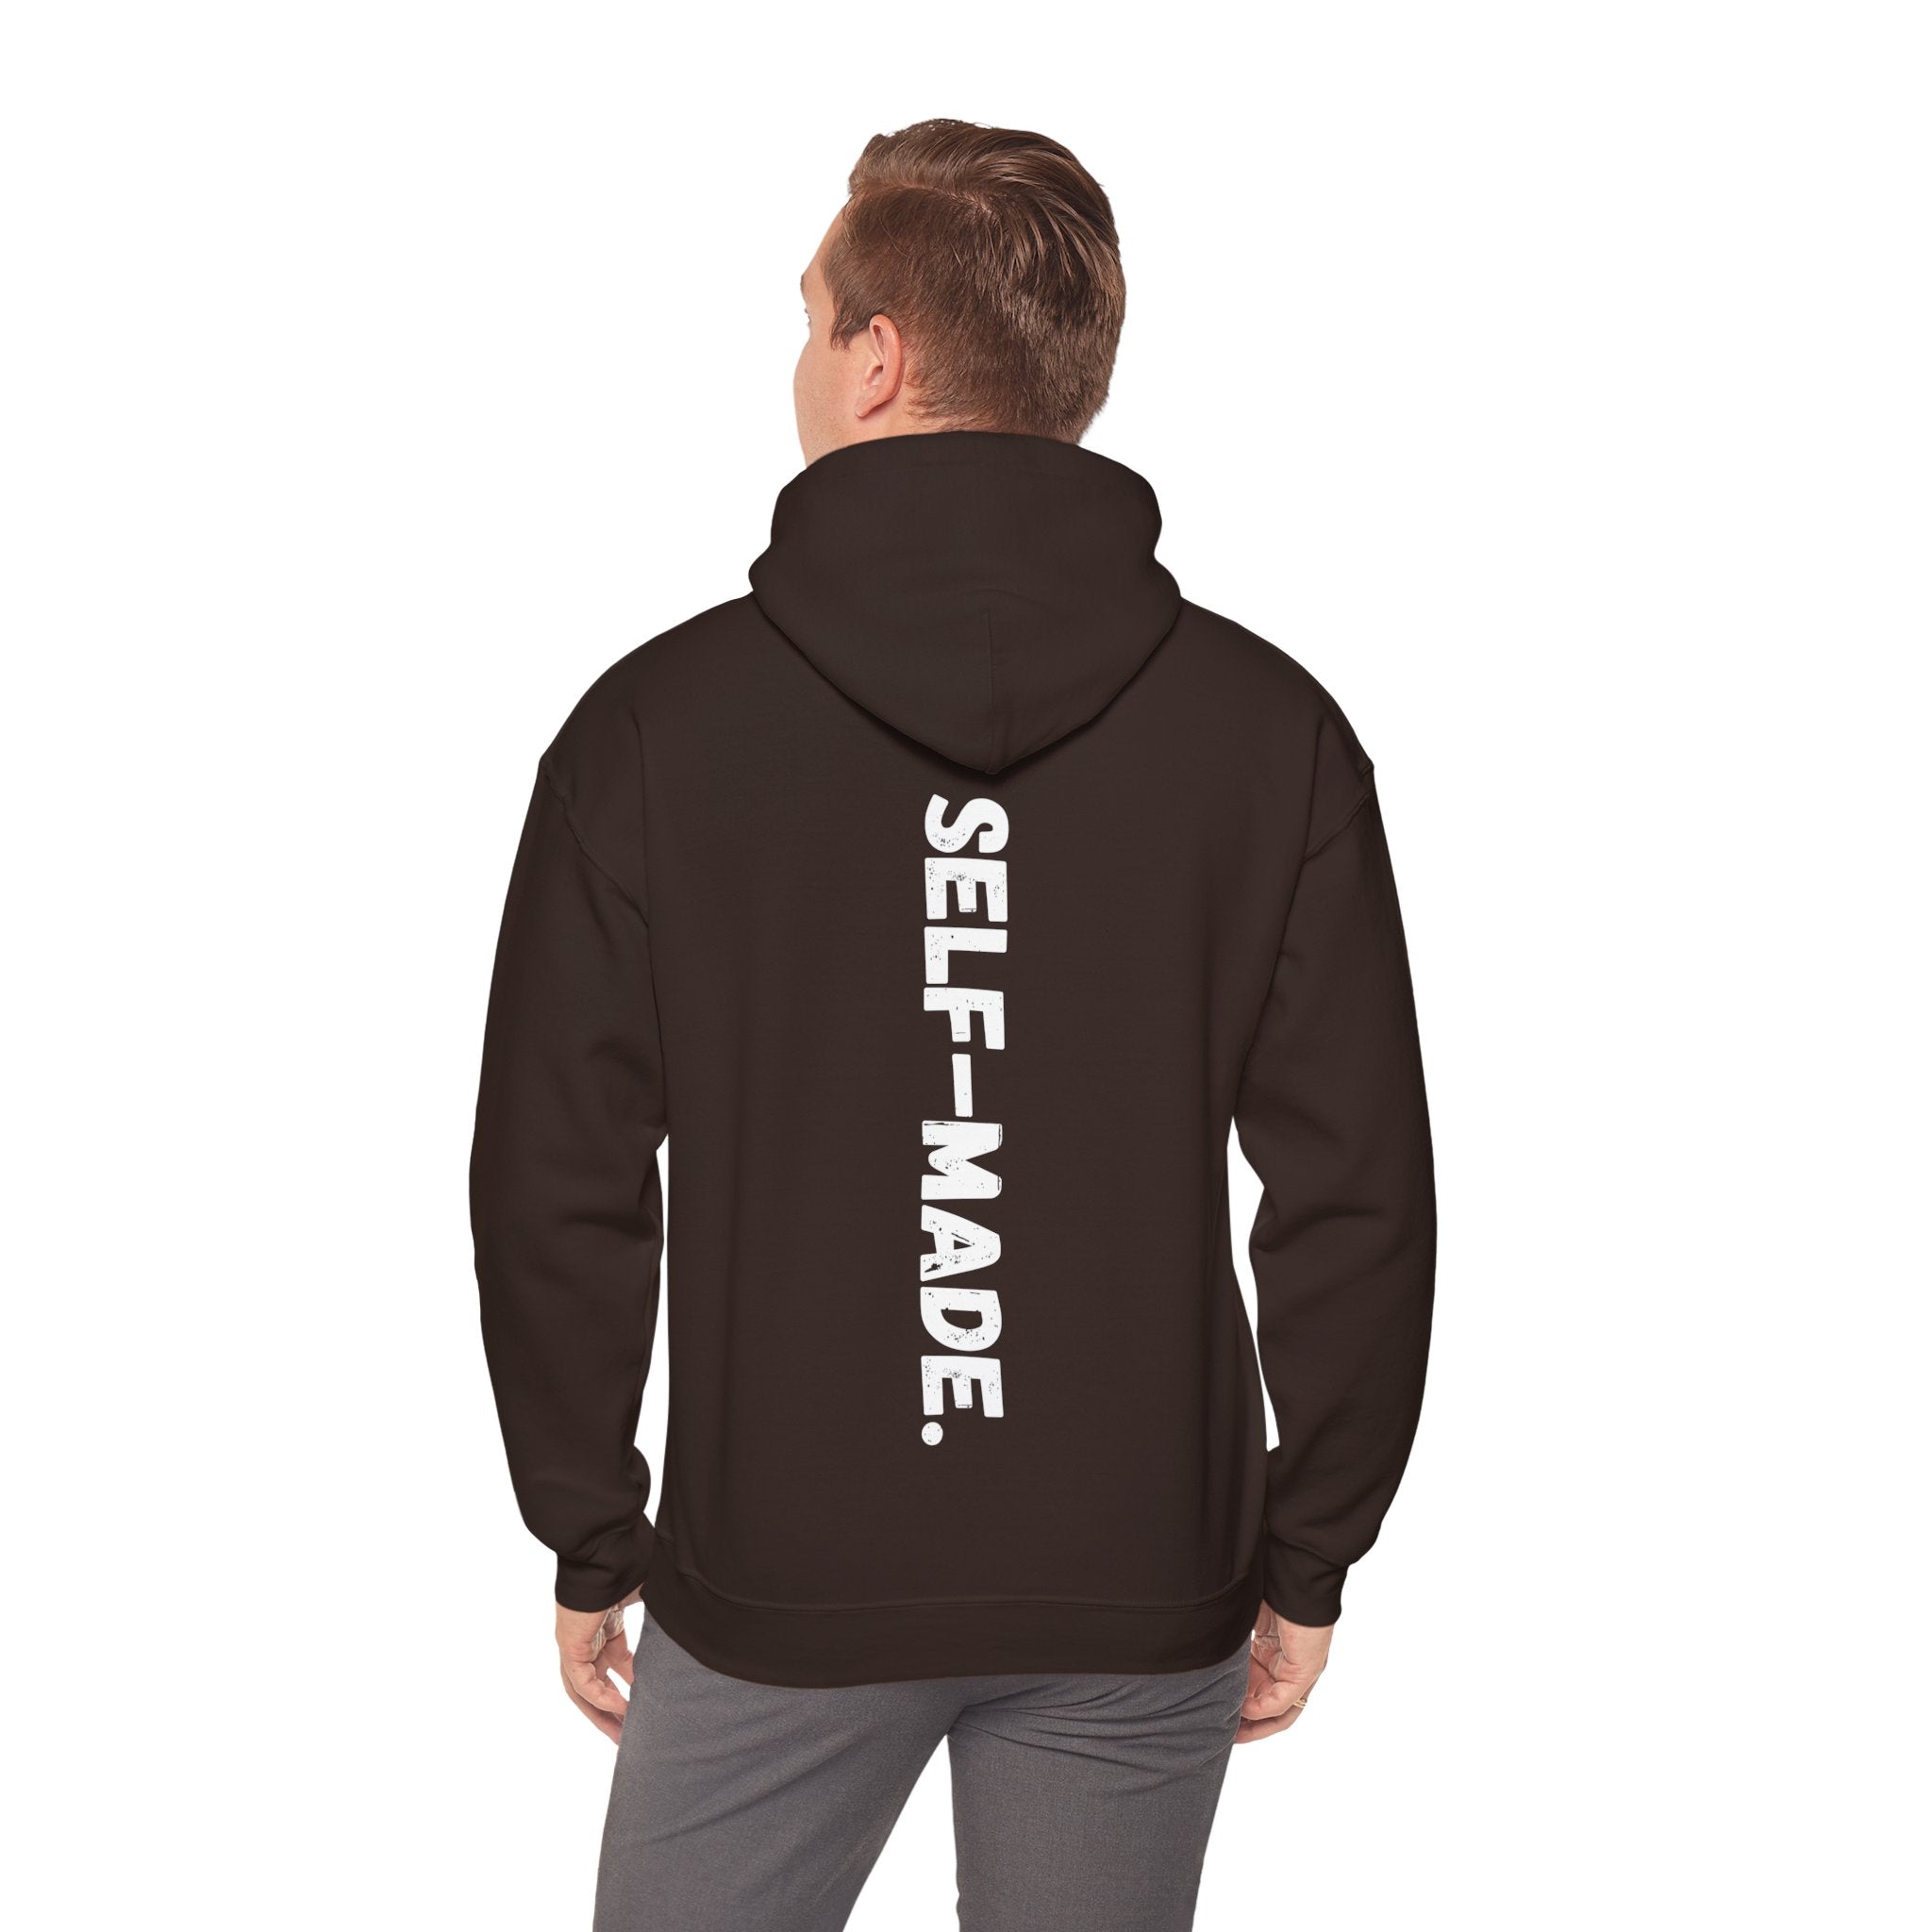 A person working hard to better his/herself - Self-Made. Hoodie - Breakthrough Collection